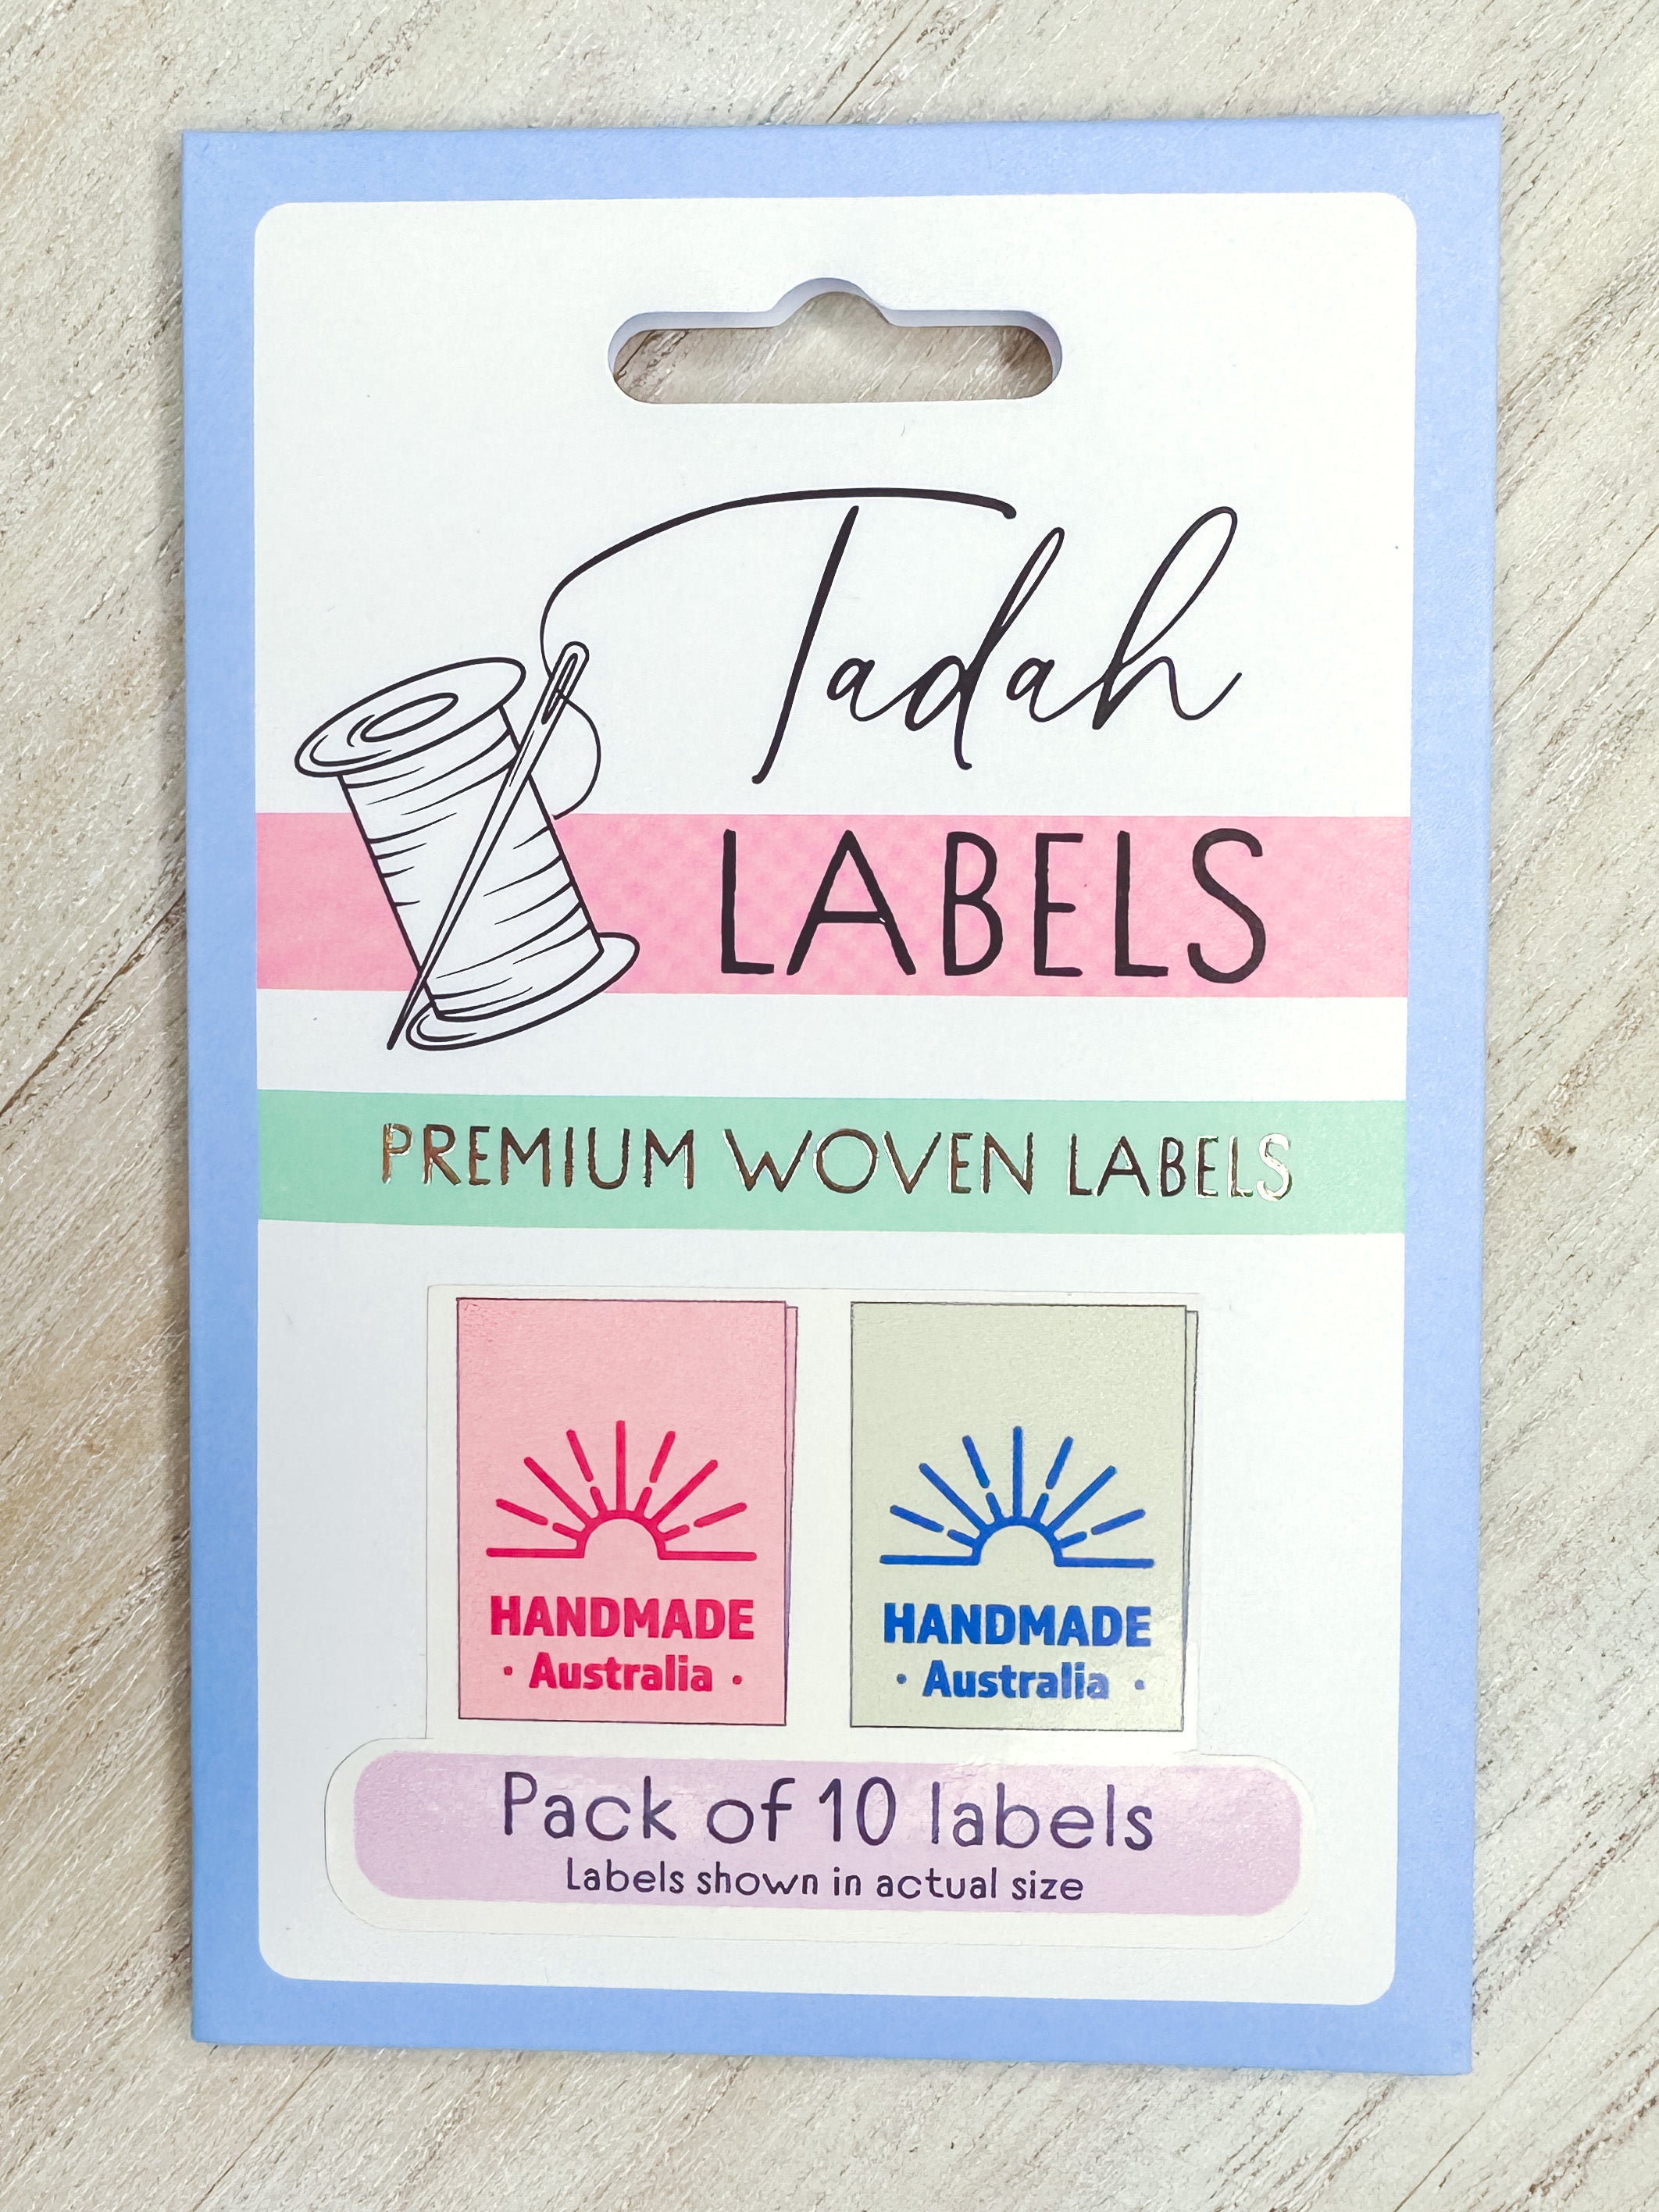 Handmade in Aus ~ 10 pack ~ Premium Woven Labels - Tadah Patterns + Sewing